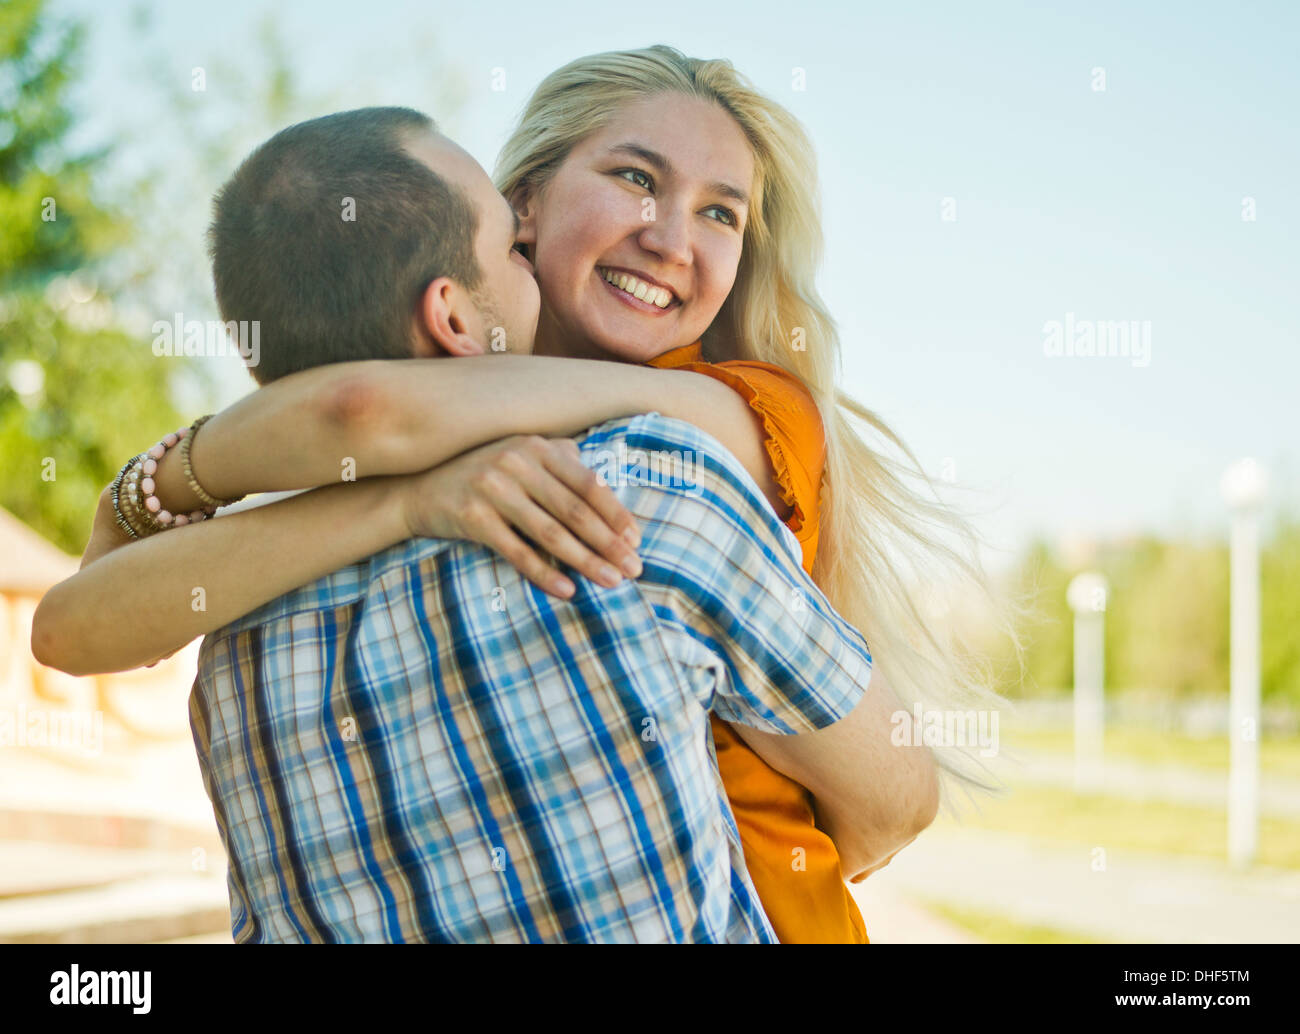 Happy young couple embracing Stock Photo